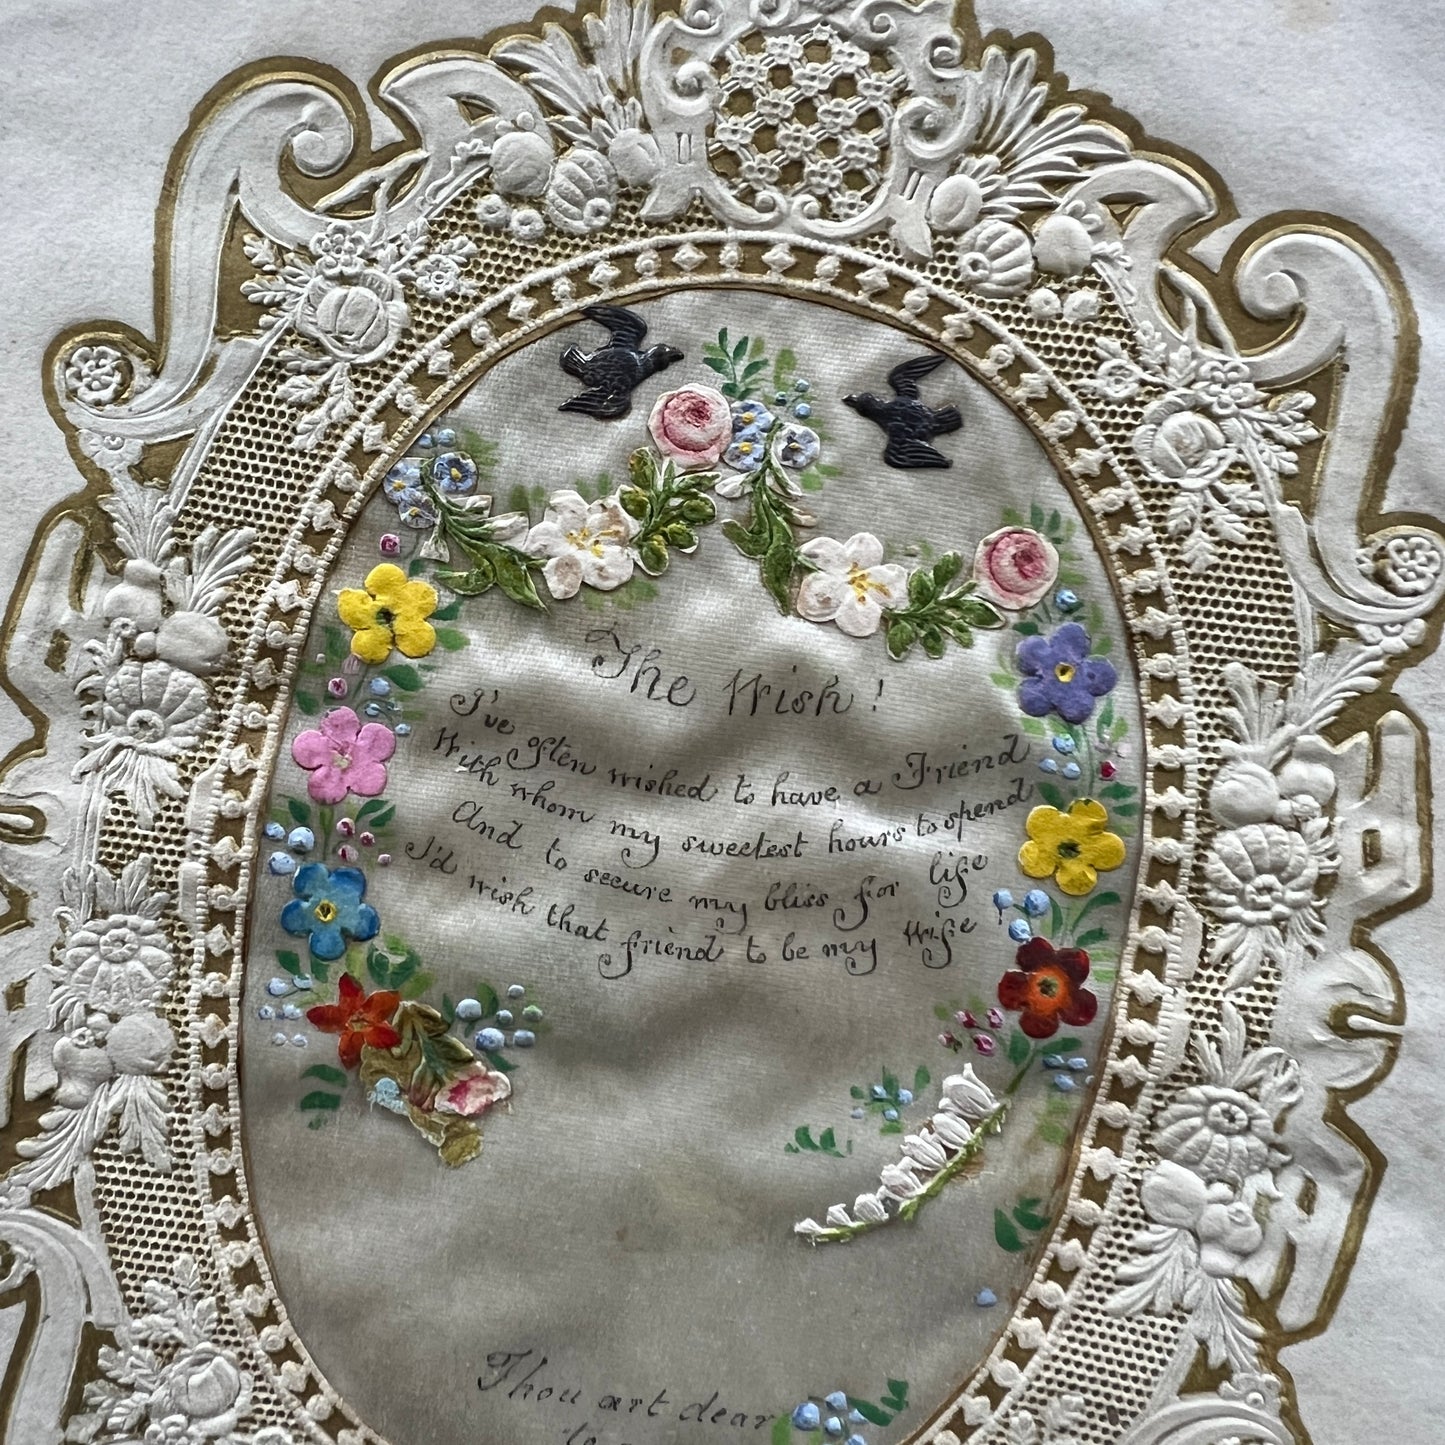 c. 1850s Large Embossed Lace Valentine Card with Hand-painted Flowers and Hand-written Poem